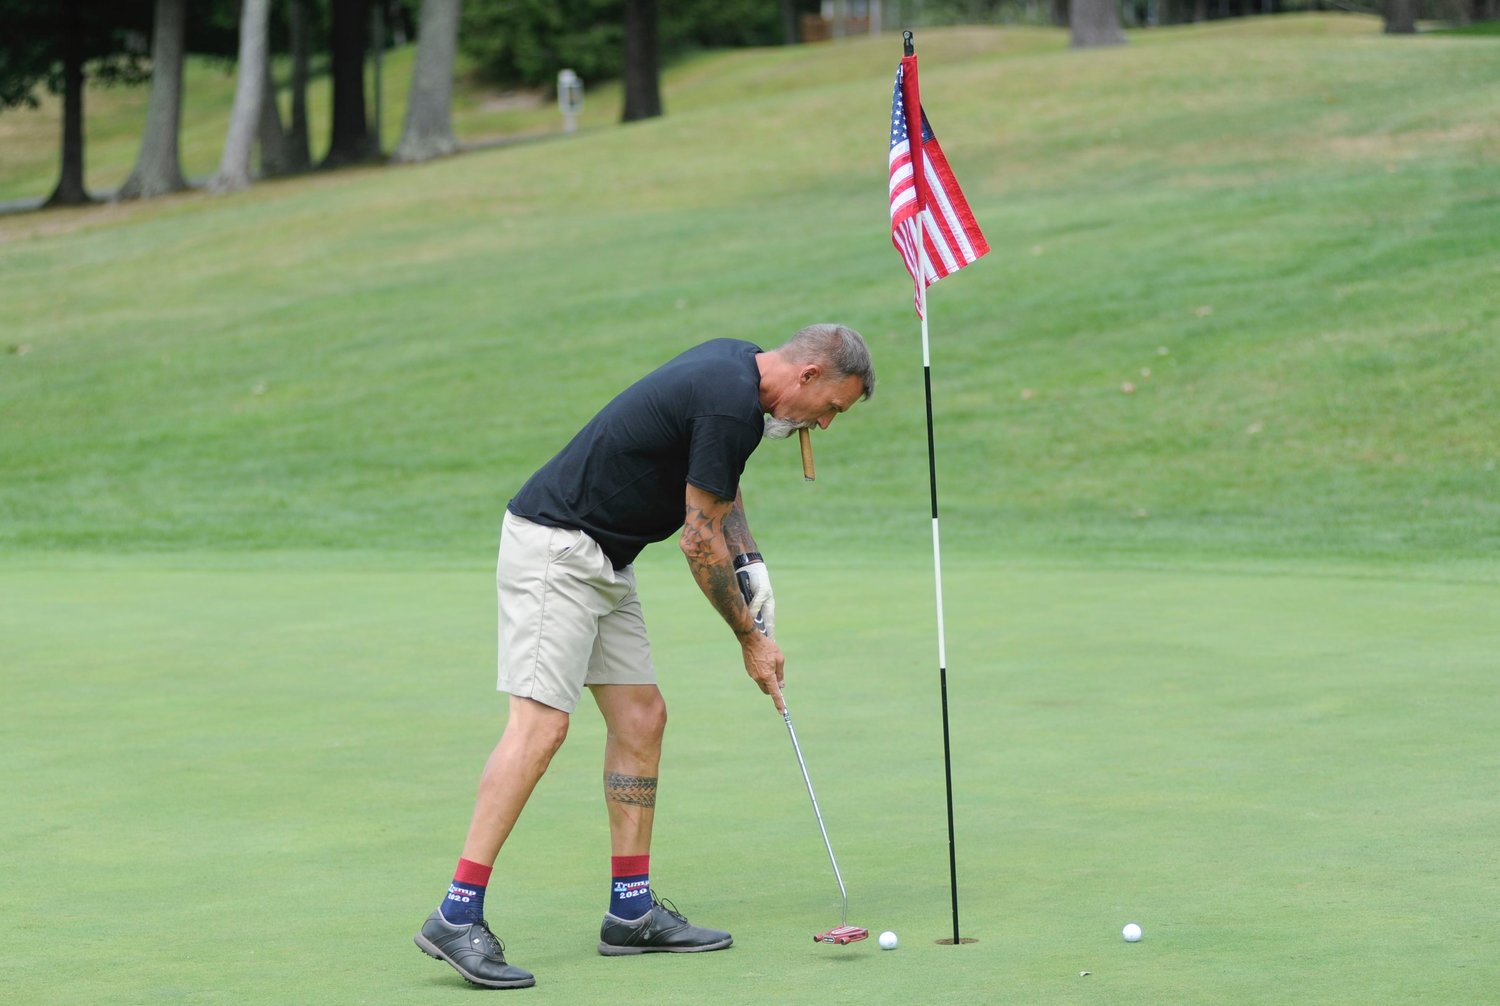 Sinking it. Jim “Strapper” Strasser on the ninth hole at Woodloch Springs. He spent 1,385 days in hostile fire zones defending freedom.